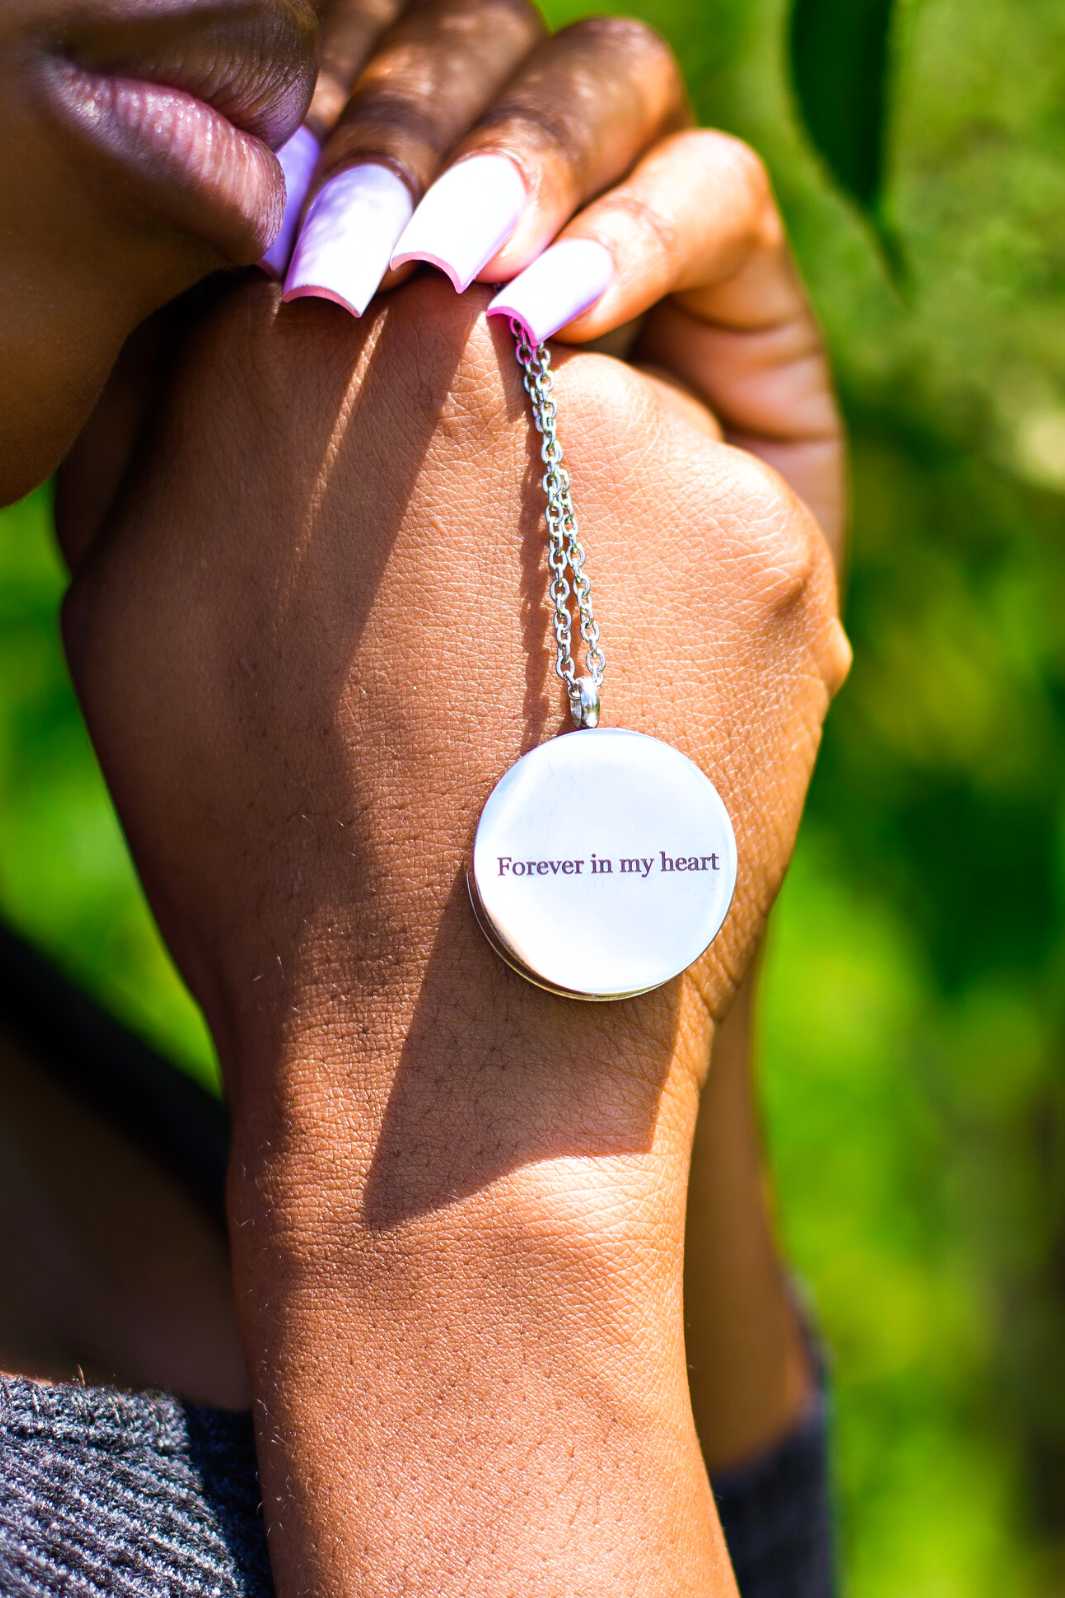 Black woman holding onto the lovely Paw Print Memorial Locket to memorialize your beloved pet and safely store their ashes for you to cherish forever.